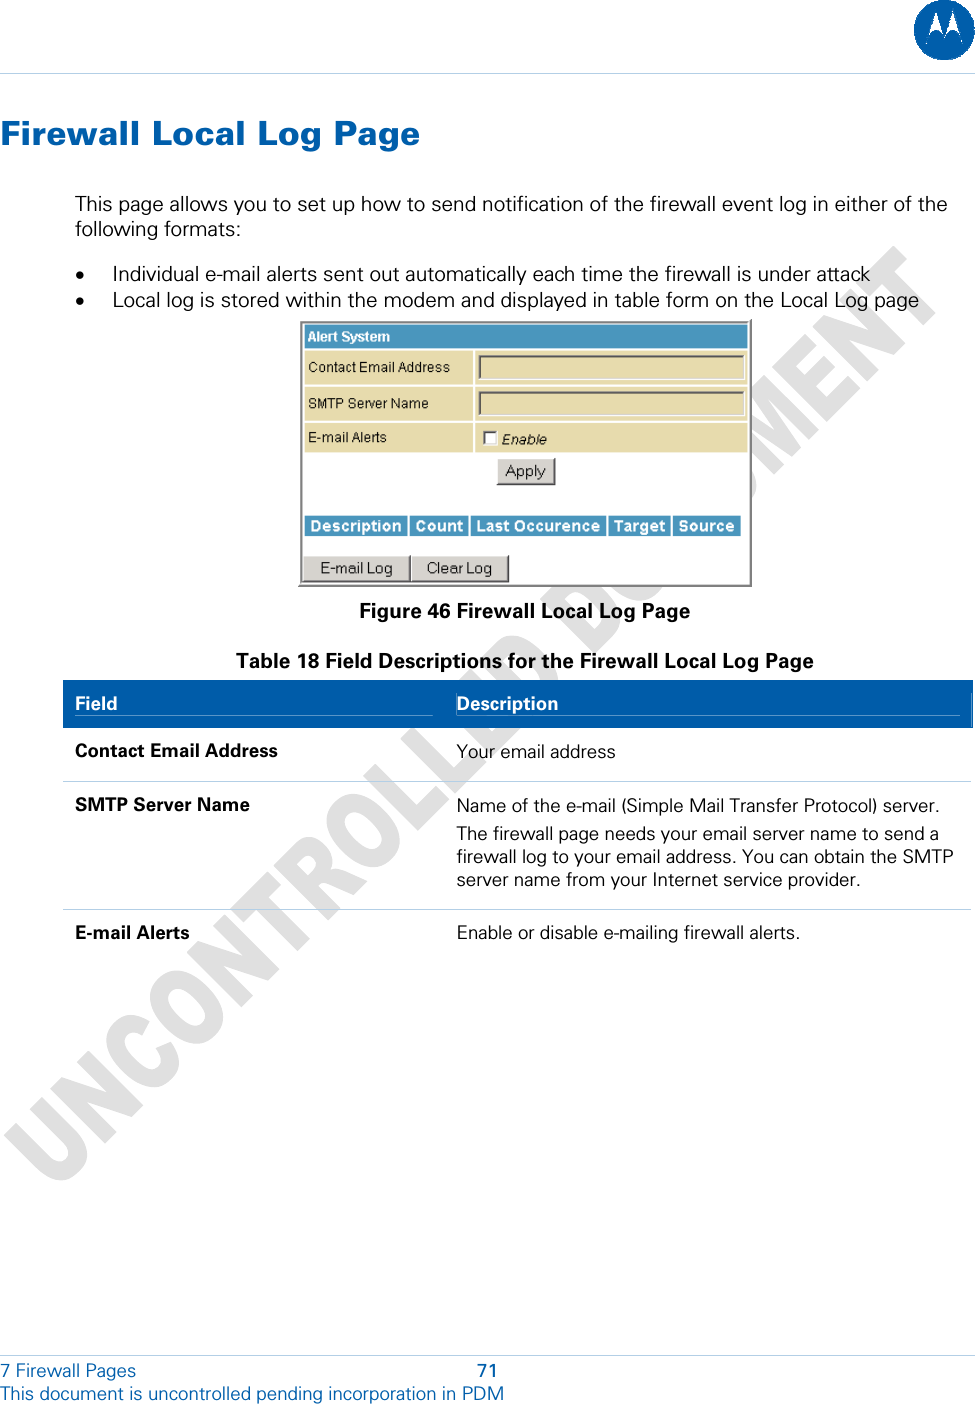  Firewall Local Log Page This page allows you to set up how to send notification of the firewall event log in either of the following formats: • Individual e-mail alerts sent out automatically each time the firewall is under attack • Local log is stored within the modem and displayed in table form on the Local Log page  Figure 46 Firewall Local Log Page Table 18 Field Descriptions for the Firewall Local Log Page Field  Description Contact Email Address  Your email address SMTP Server Name  Name of the e-mail (Simple Mail Transfer Protocol) server. The firewall page needs your email server name to send a firewall log to your email address. You can obtain the SMTP server name from your Internet service provider. E-mail Alerts  Enable or disable e-mailing firewall alerts. 7 Firewall Pages  71 This document is uncontrolled pending incorporation in PDM  